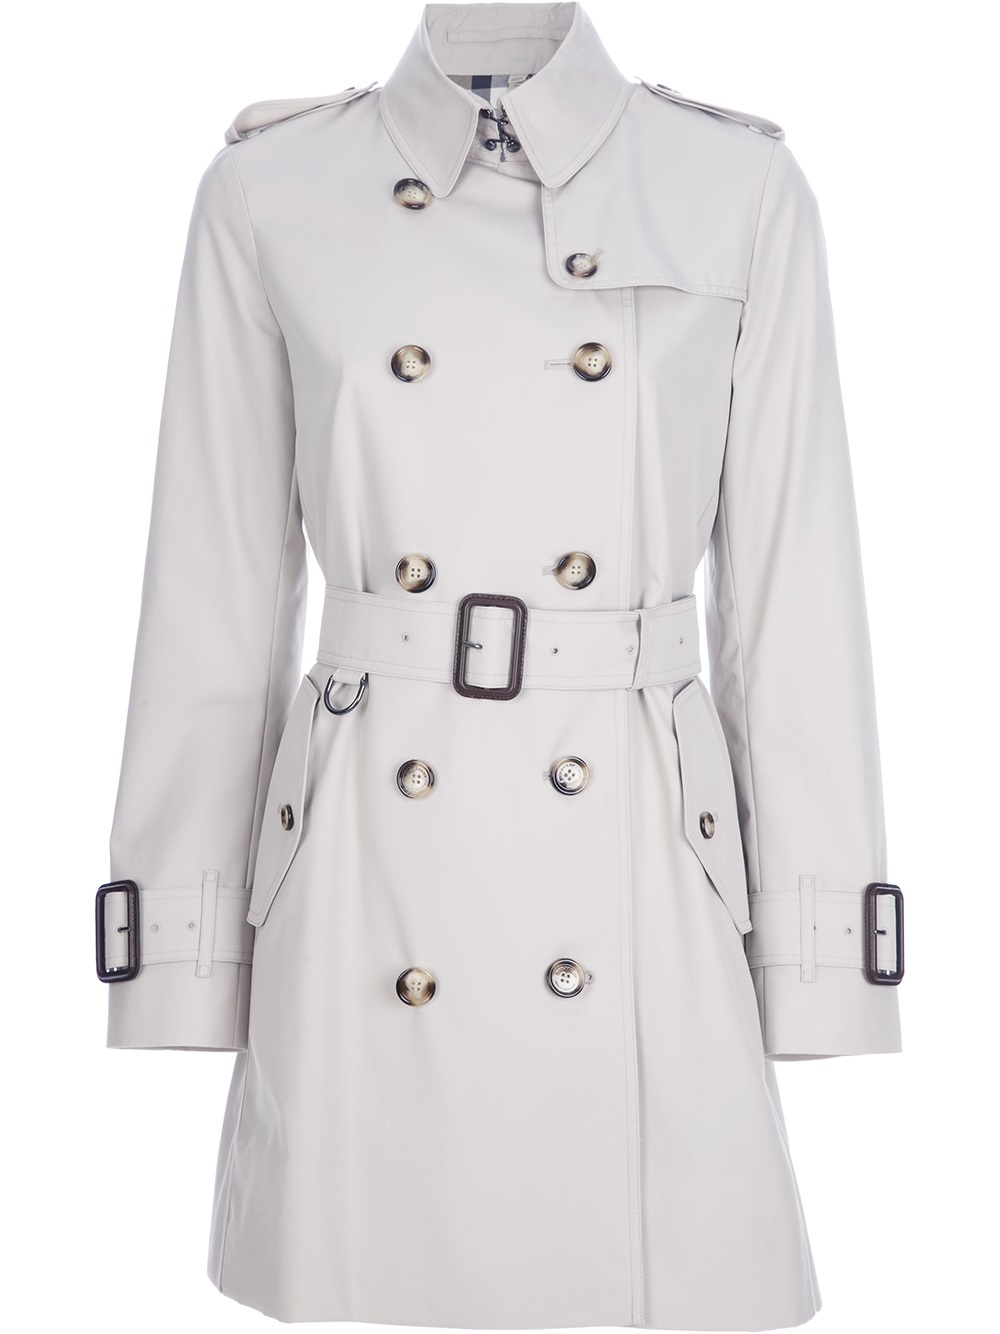 Burberry London Marystow Trench Coat in White (nude) | Lyst